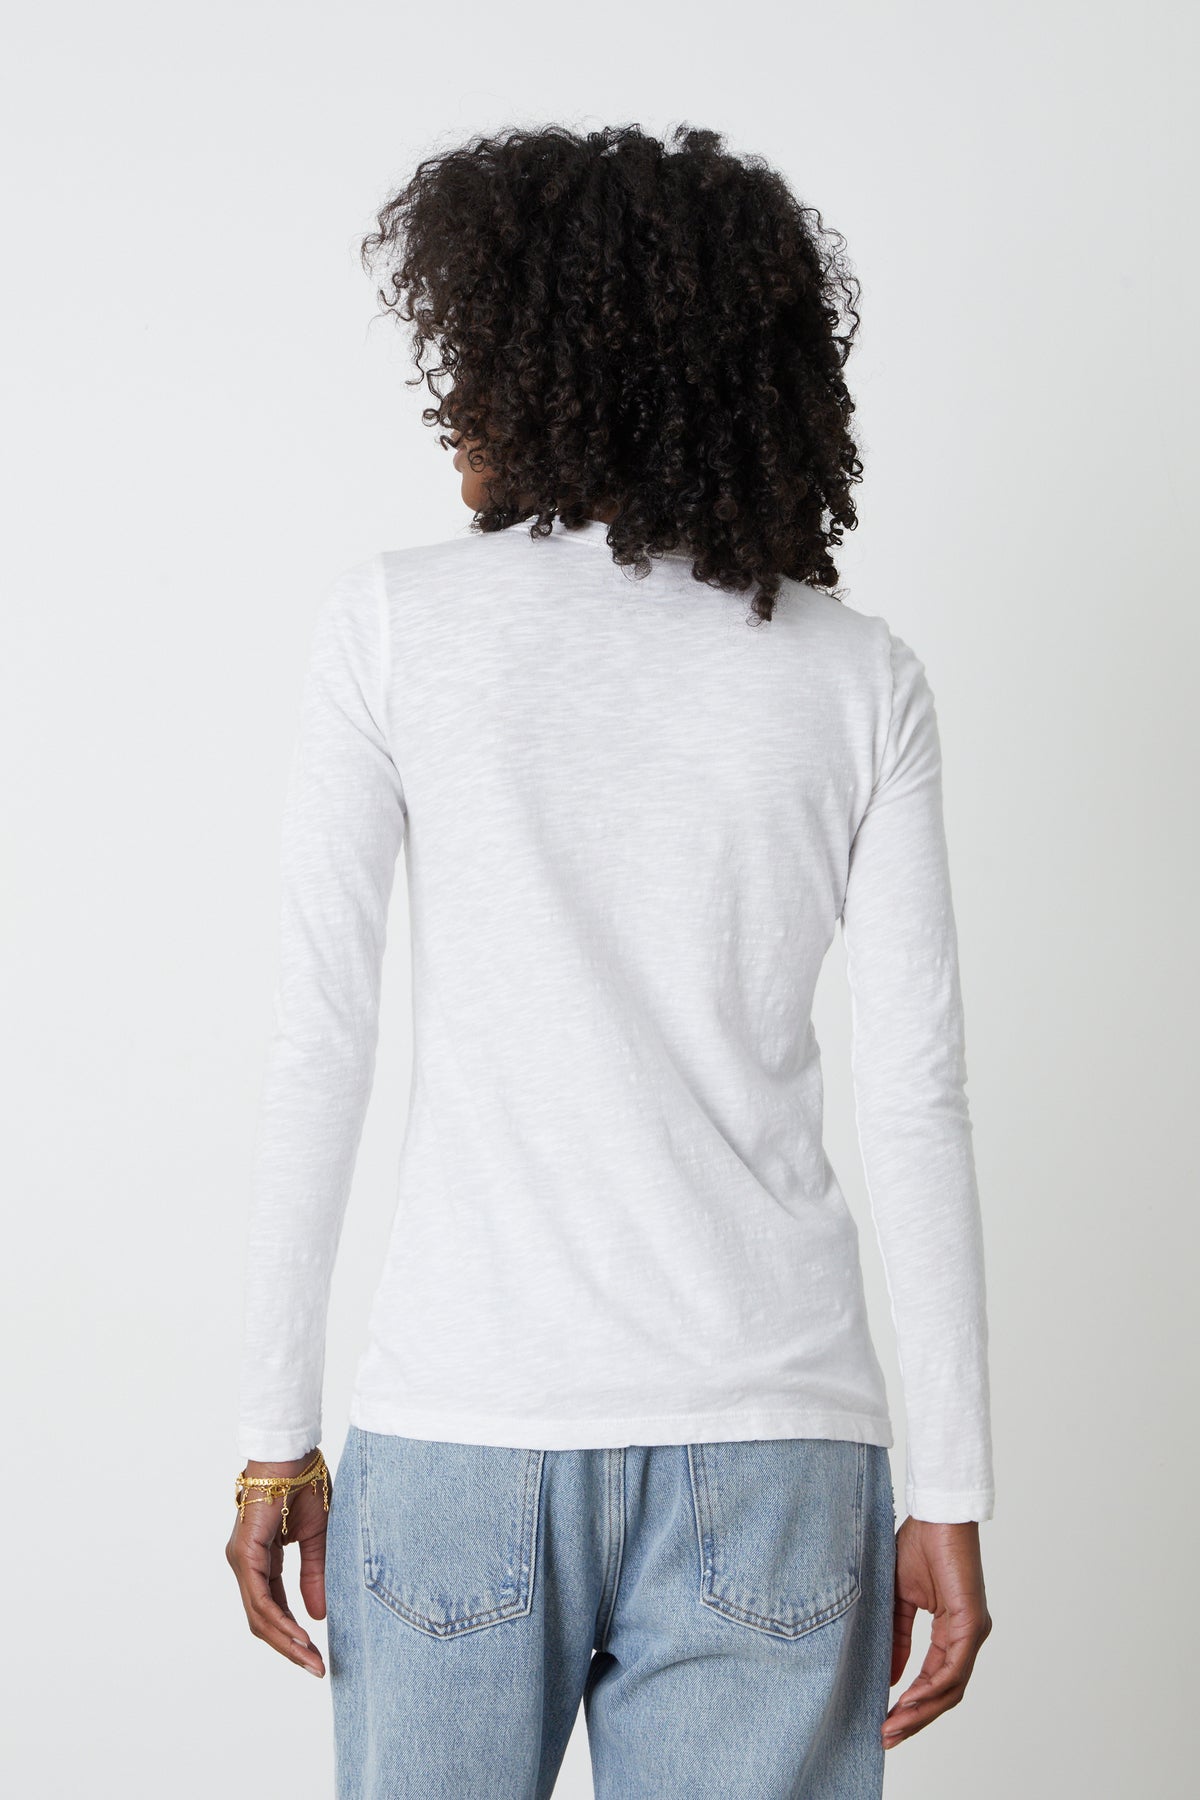 the back view of a woman wearing jeans and a Velvet by Graham & Spencer LIZZIE ORIGINAL SLUB LONG SLEEVE TEE.-26235766177985